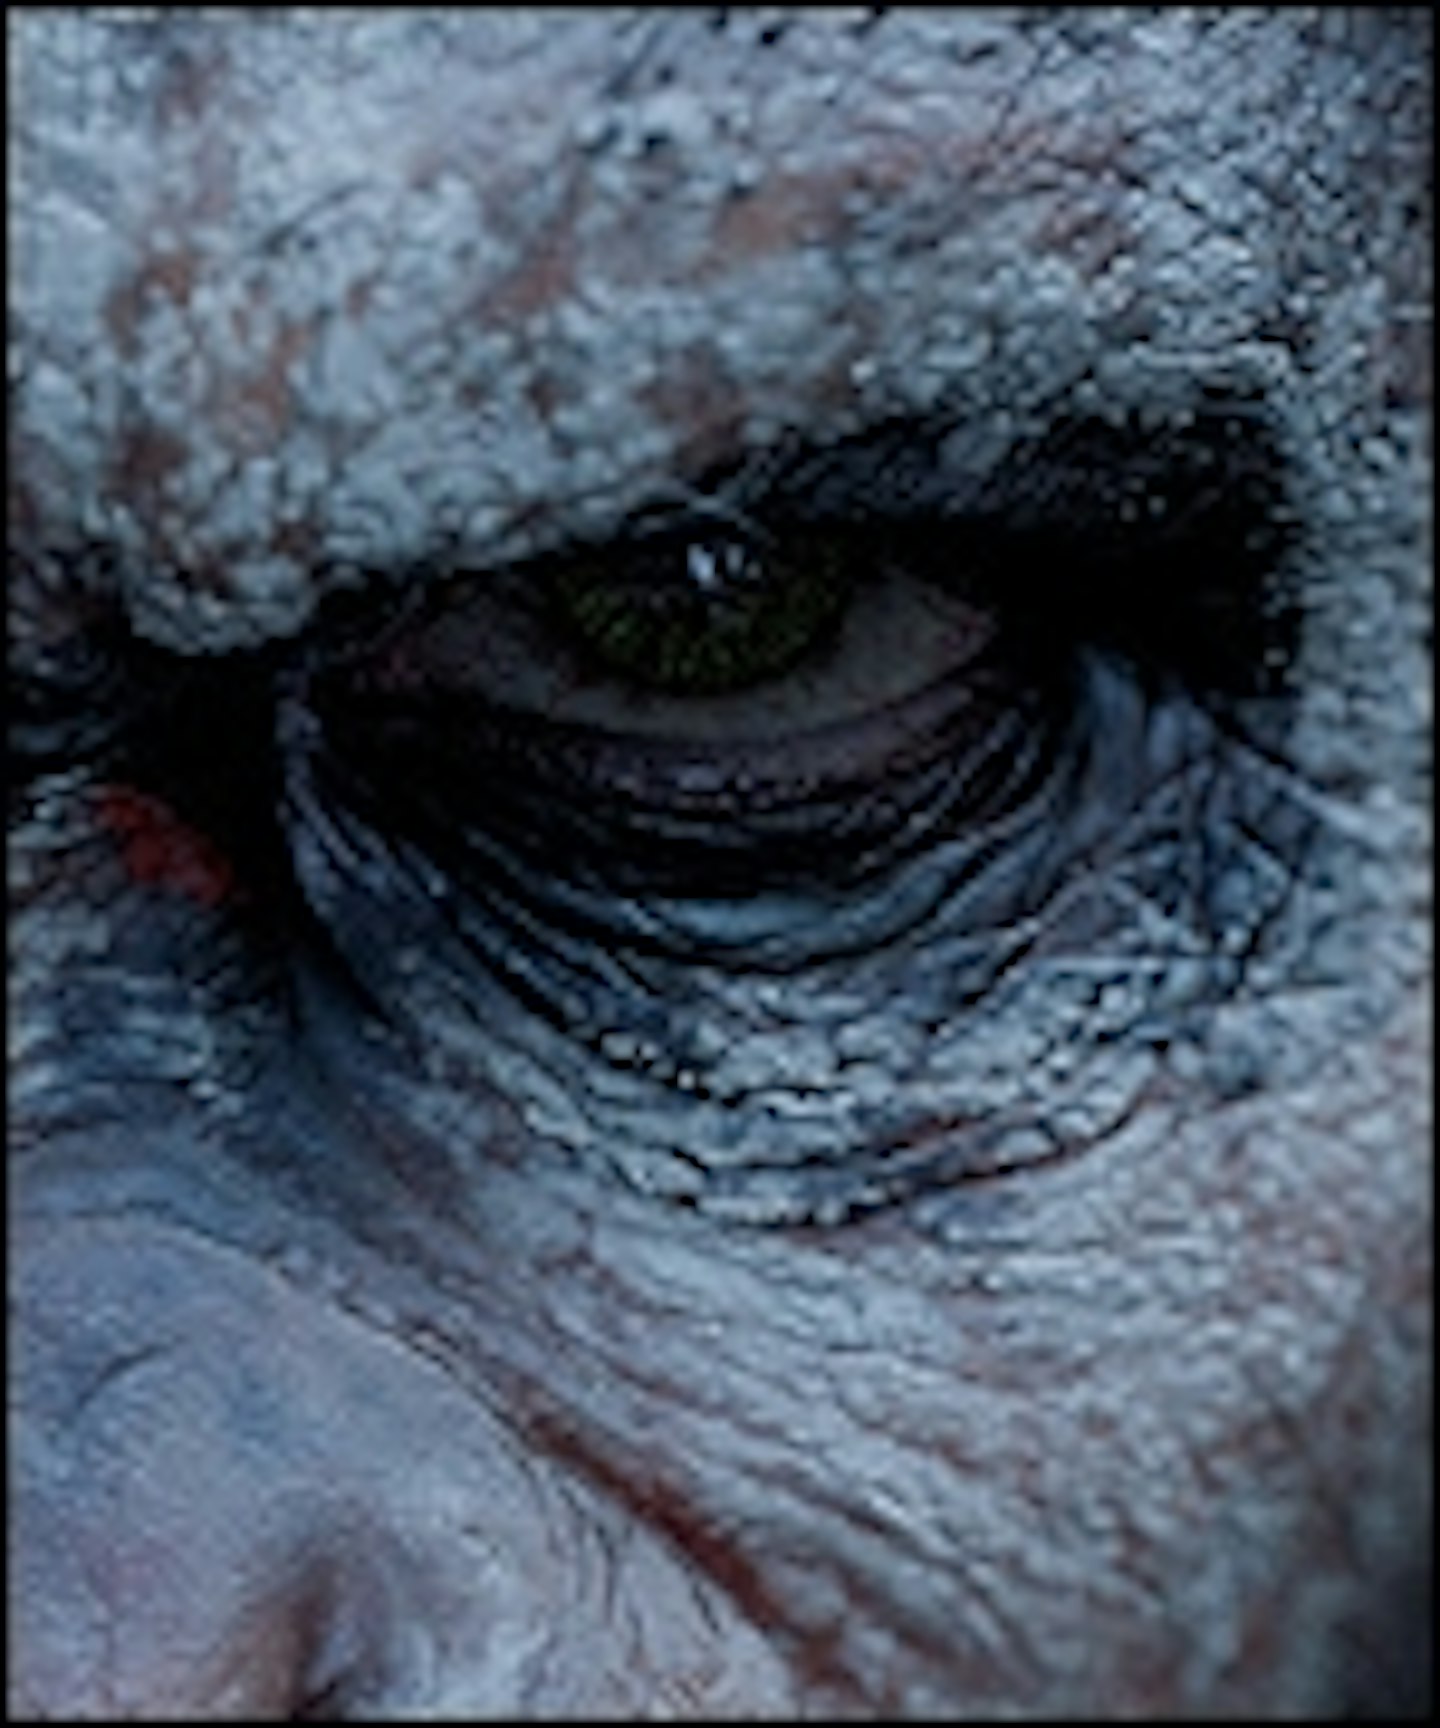 First Dawn Of The Planet Of The Apes Posters Arrive